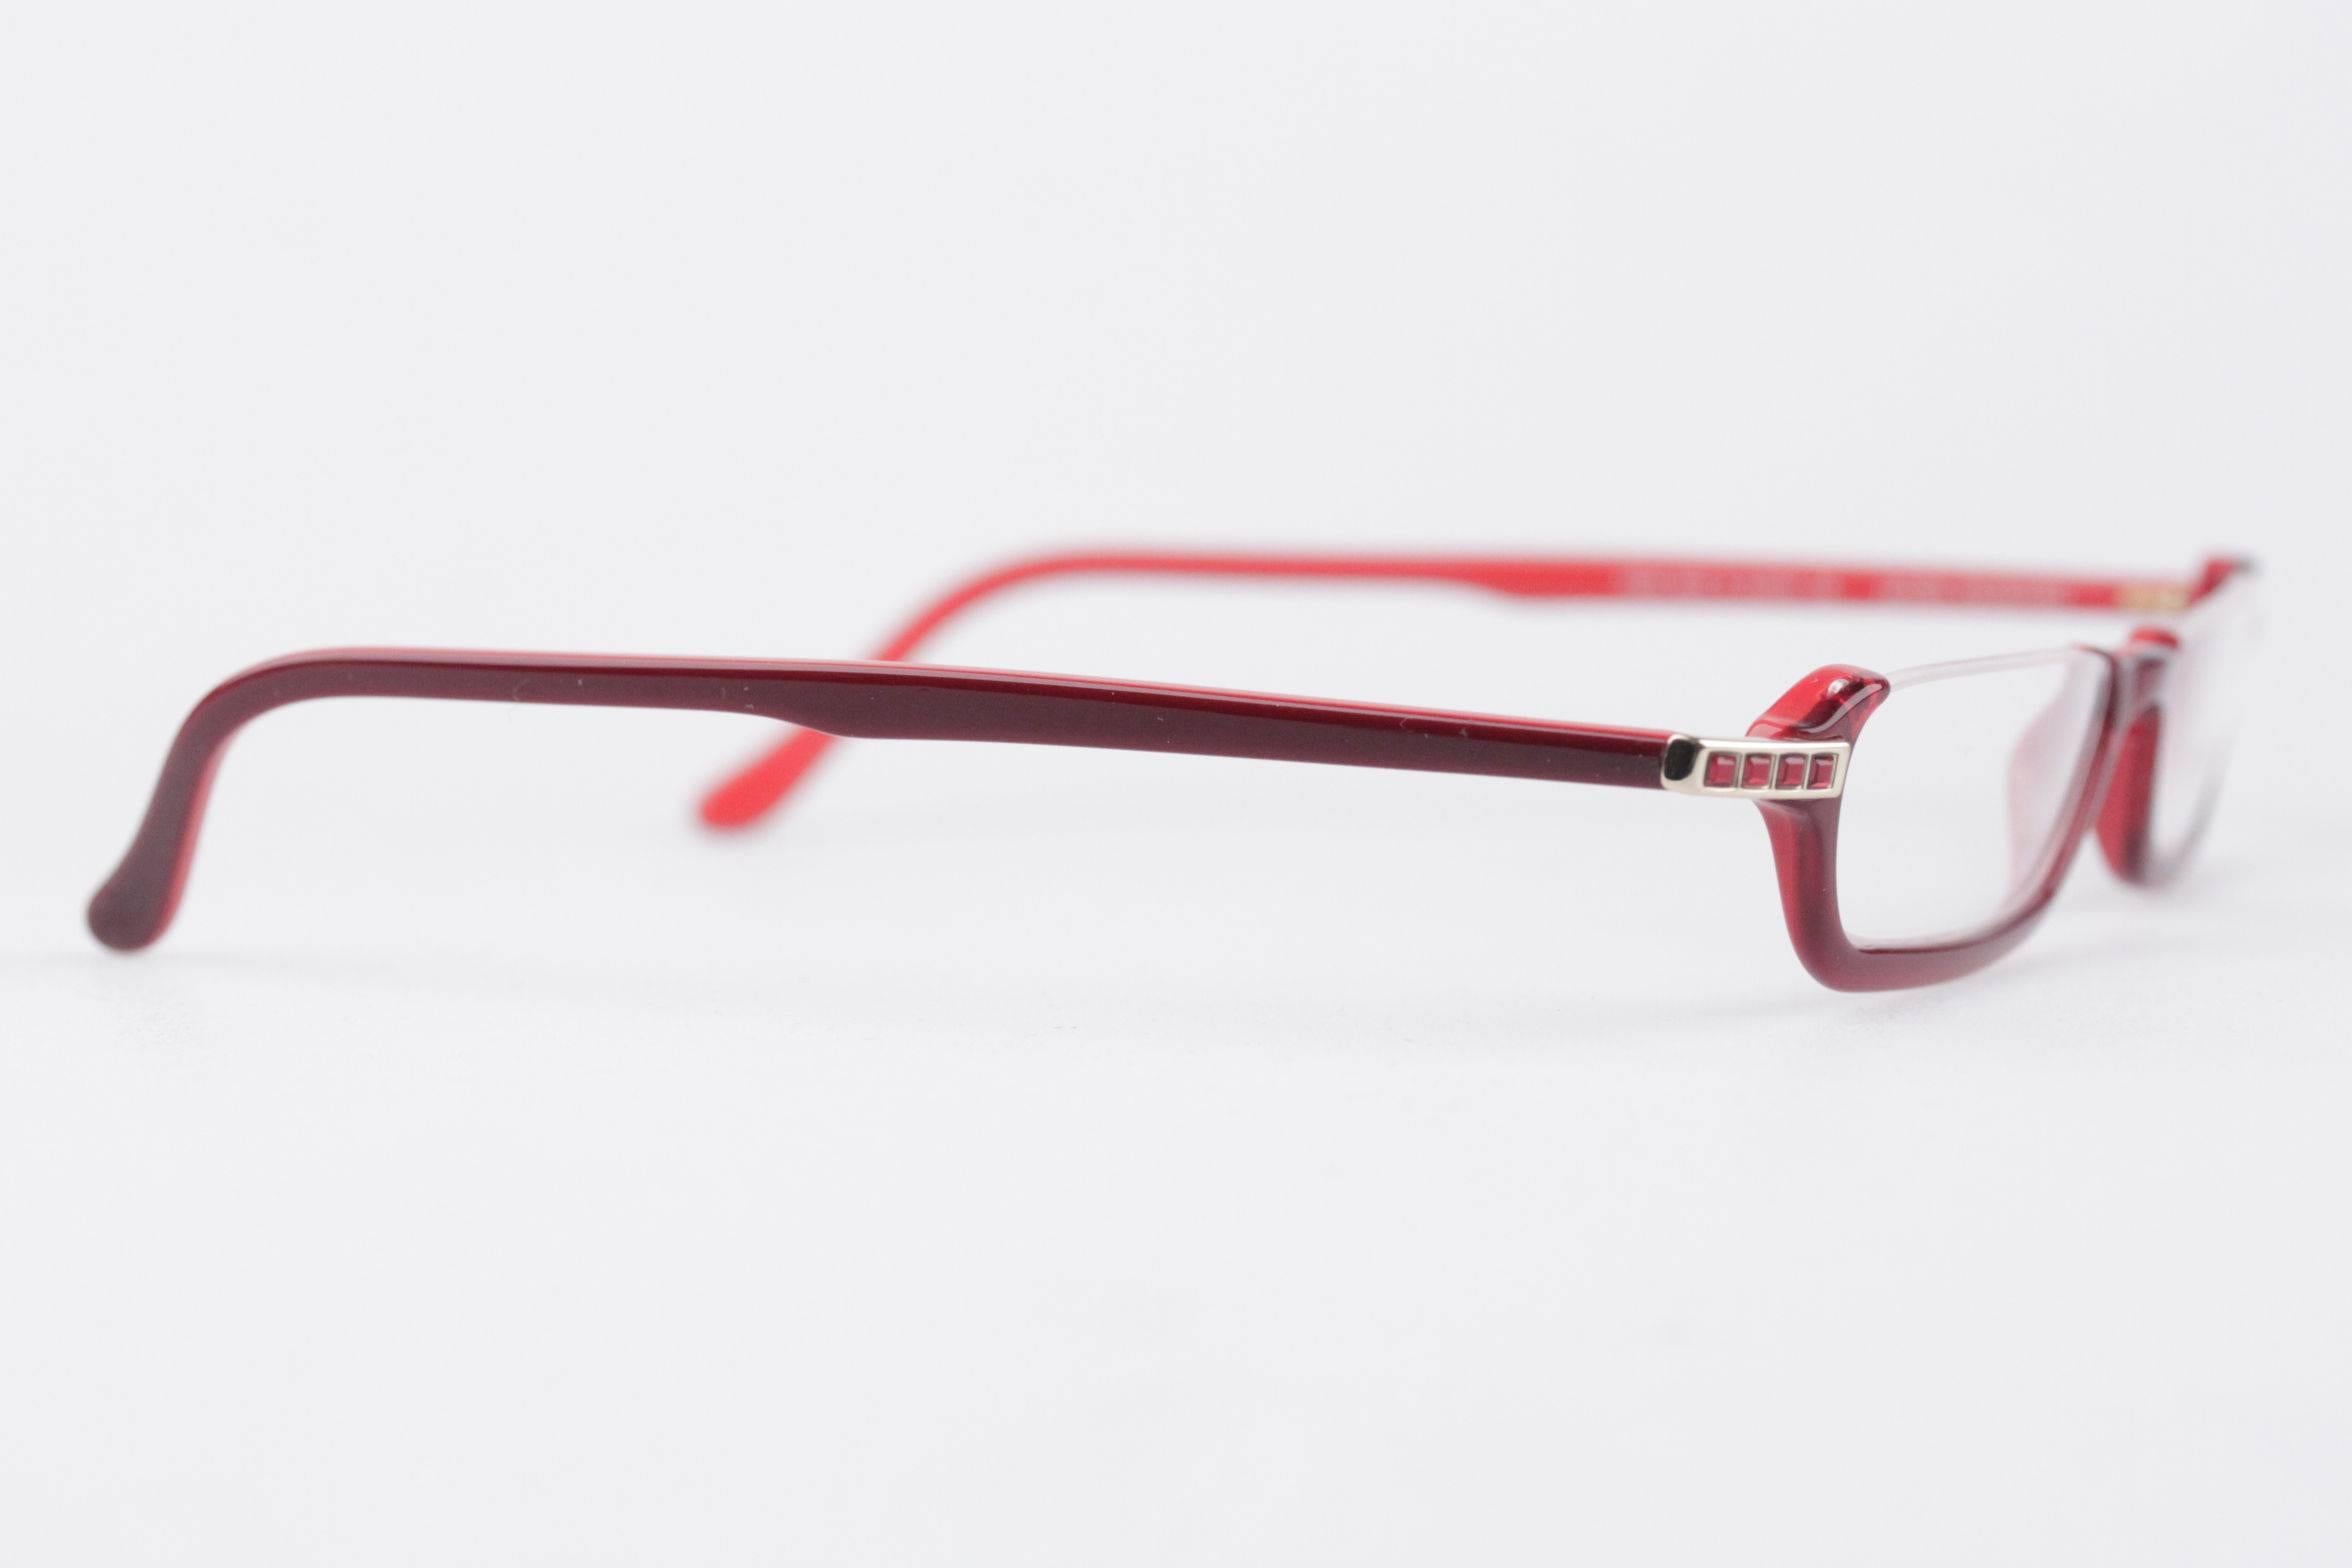 - DANIEL SWAROVSKI glasses model S141

- Frame made in Austria

- Red acetate half rim frame

- 4 red SWAROVSKI crystals embellishment on the sides

- Clear, demo lenses (wirg some scratches due to storage)

Any other detial which is not